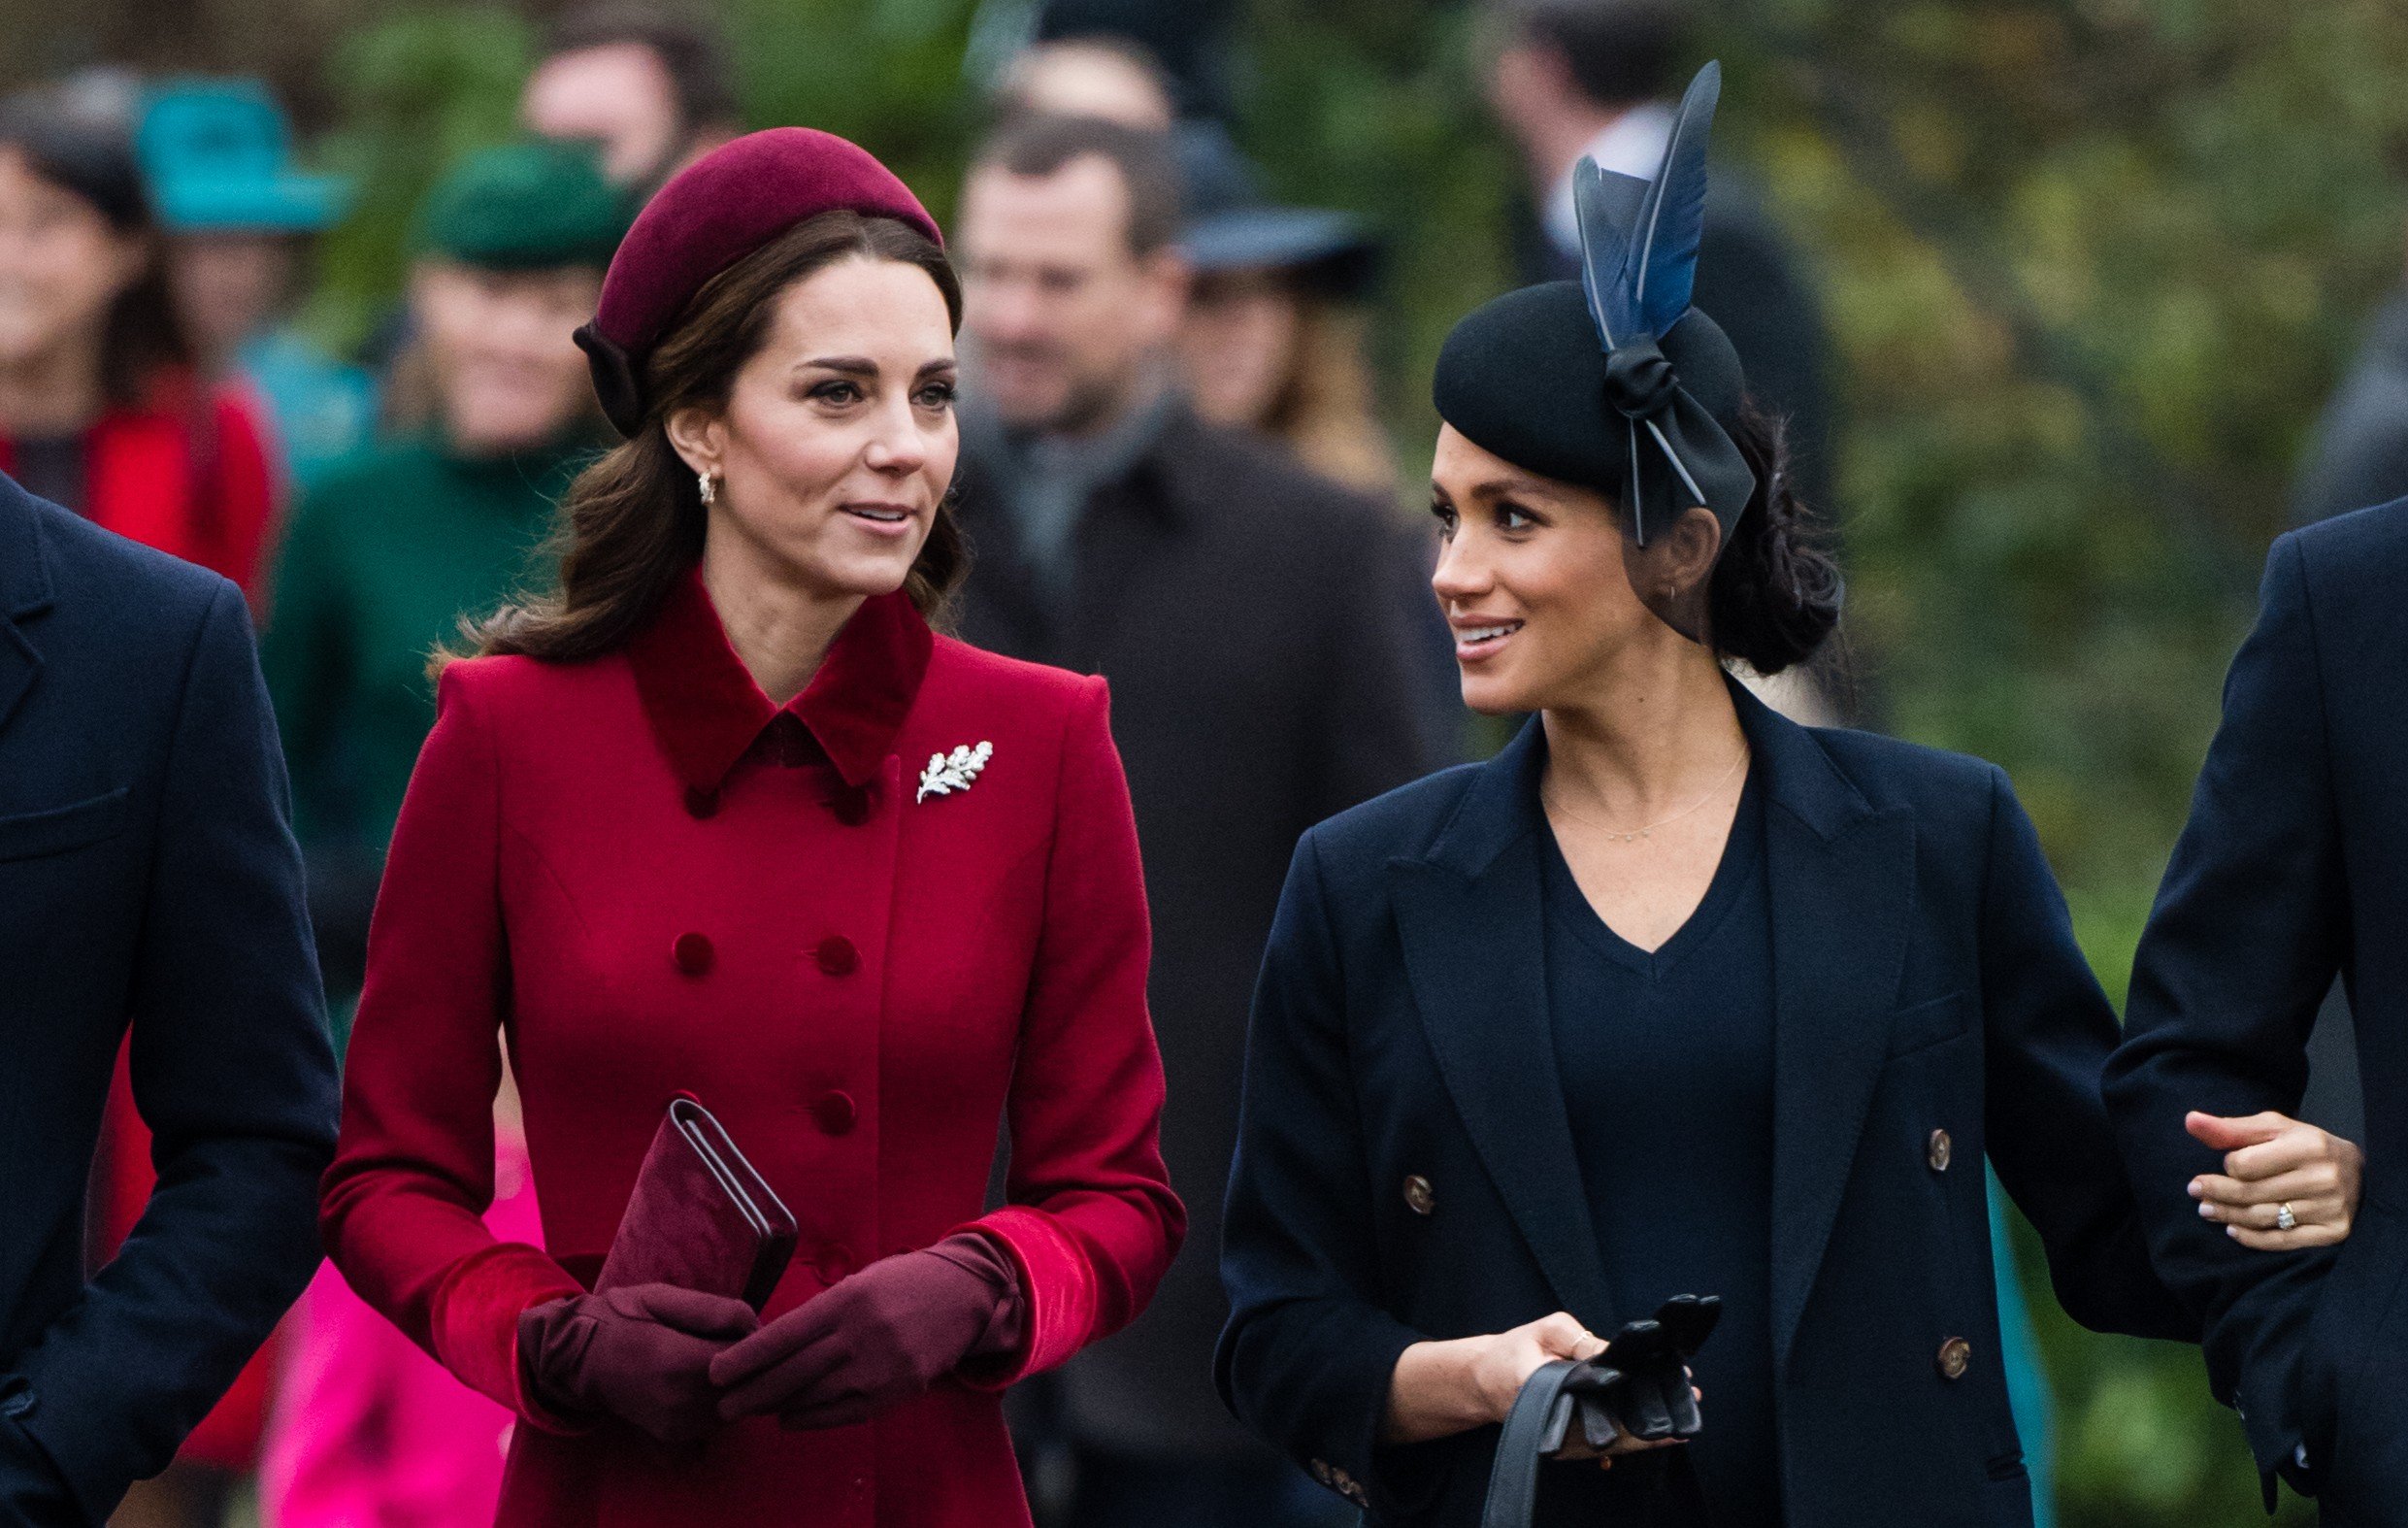 Kate Middleton and Meghan Markle walk together after attending Christmas Day Church service at Church of St. Mary Magdalene on the Sandringham estate on December 25, 2018 in King's Lynn, England.